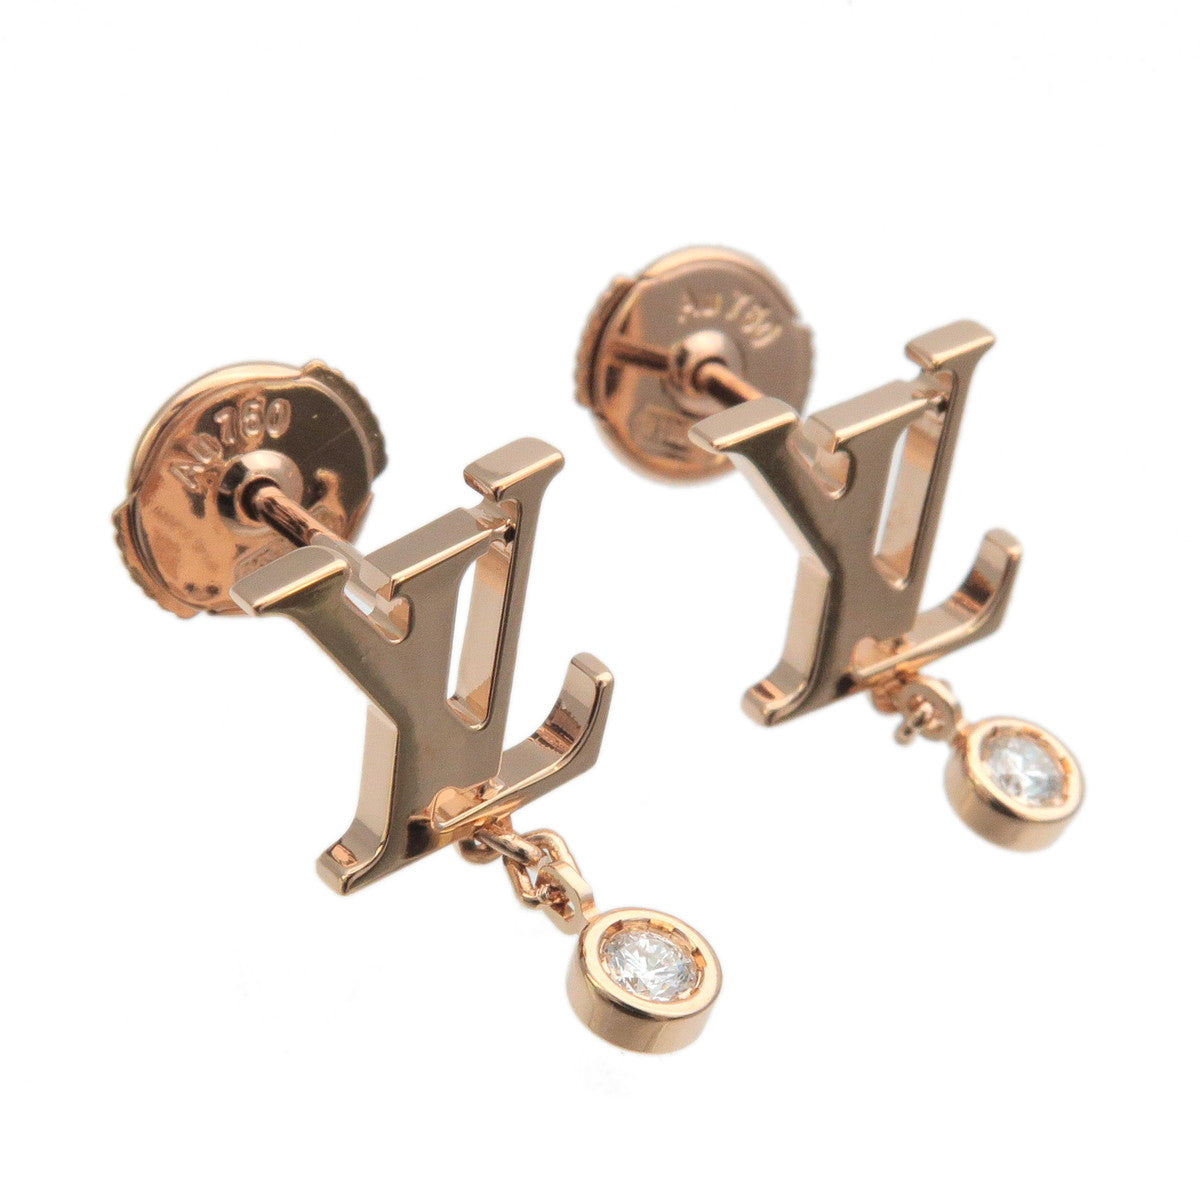 Sold at Auction: LOUIS VUITTON IDYLLE BLOSSOM LV EARRINGS